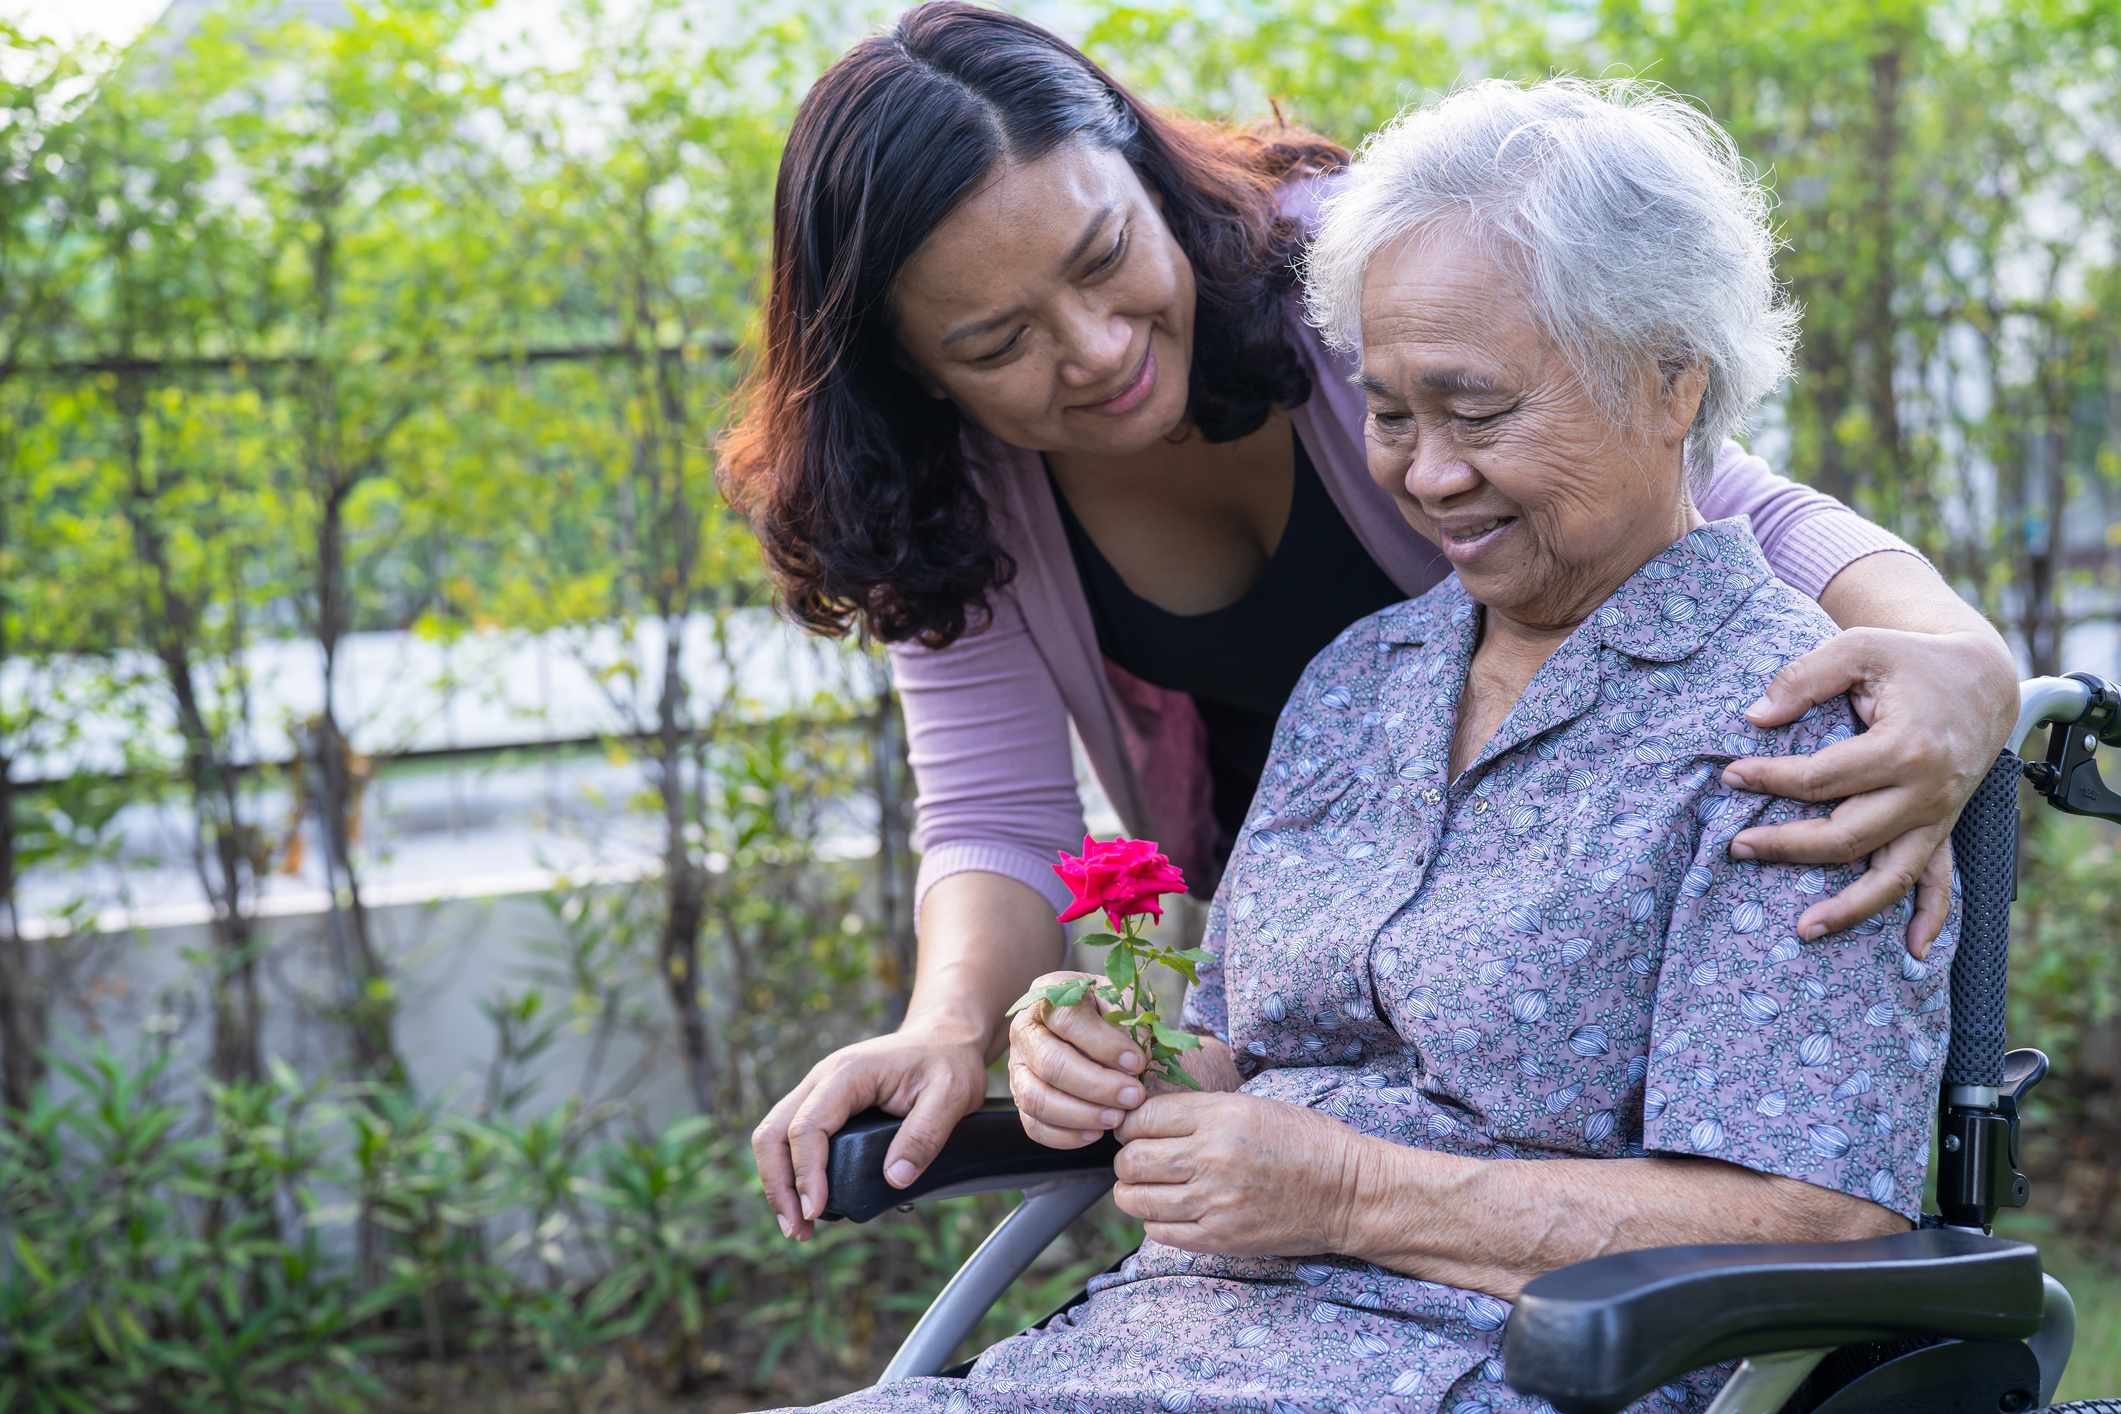 An Asian woman wraps her arm around her mother's shoulders, who is sitting in a chair smiling while holding a red flower.